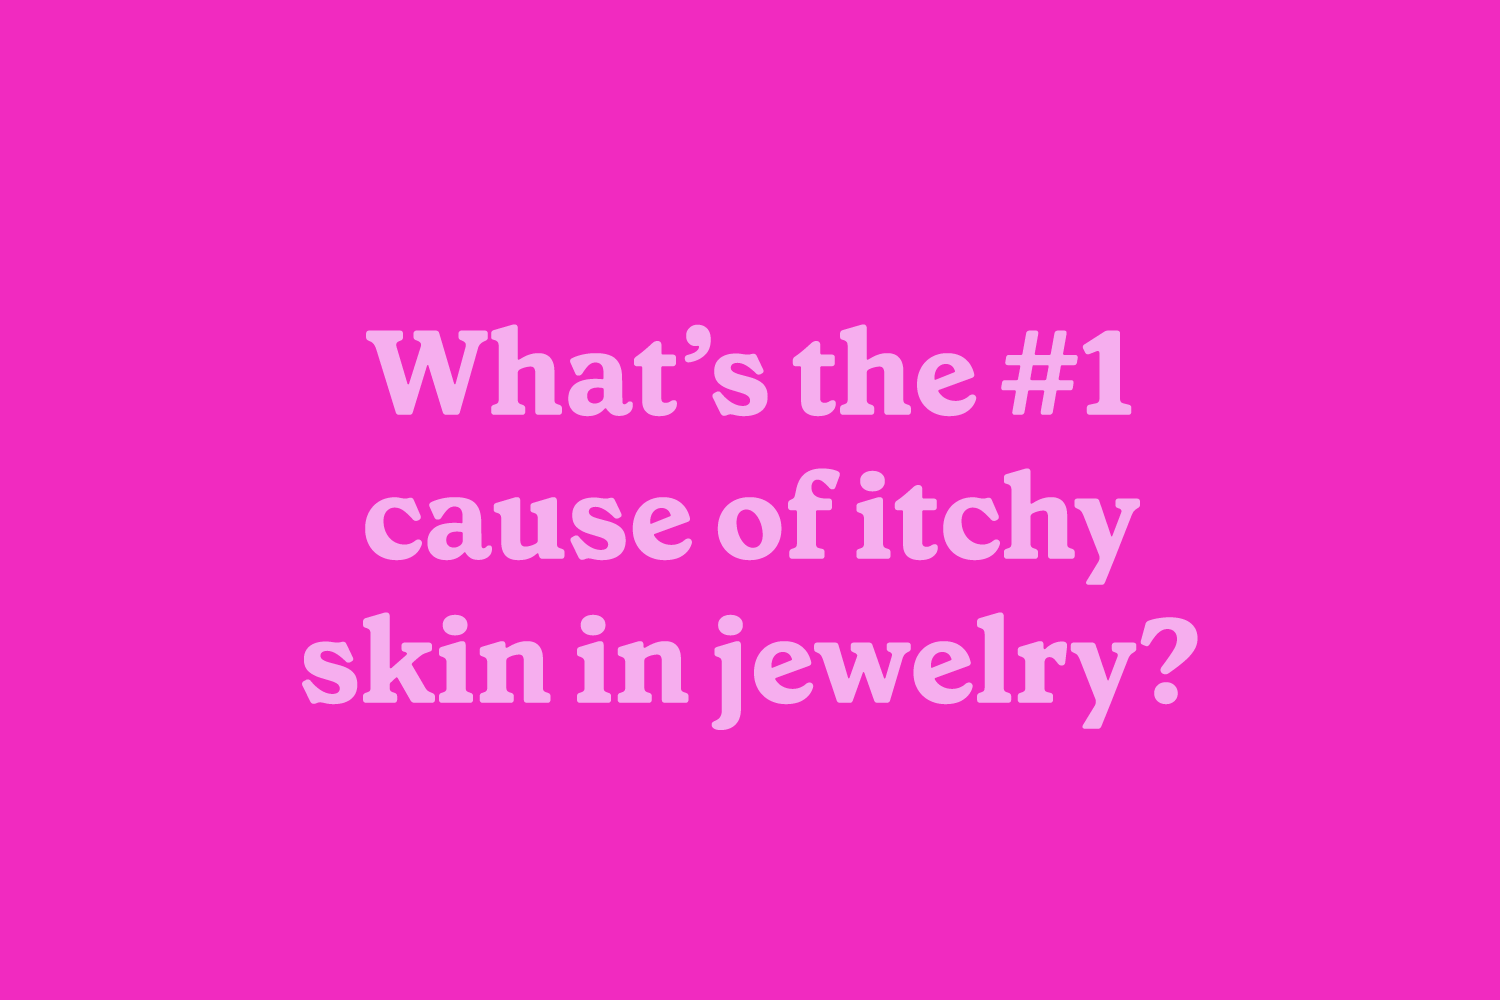 What is the #1 cause of itchy skin in jewelry?